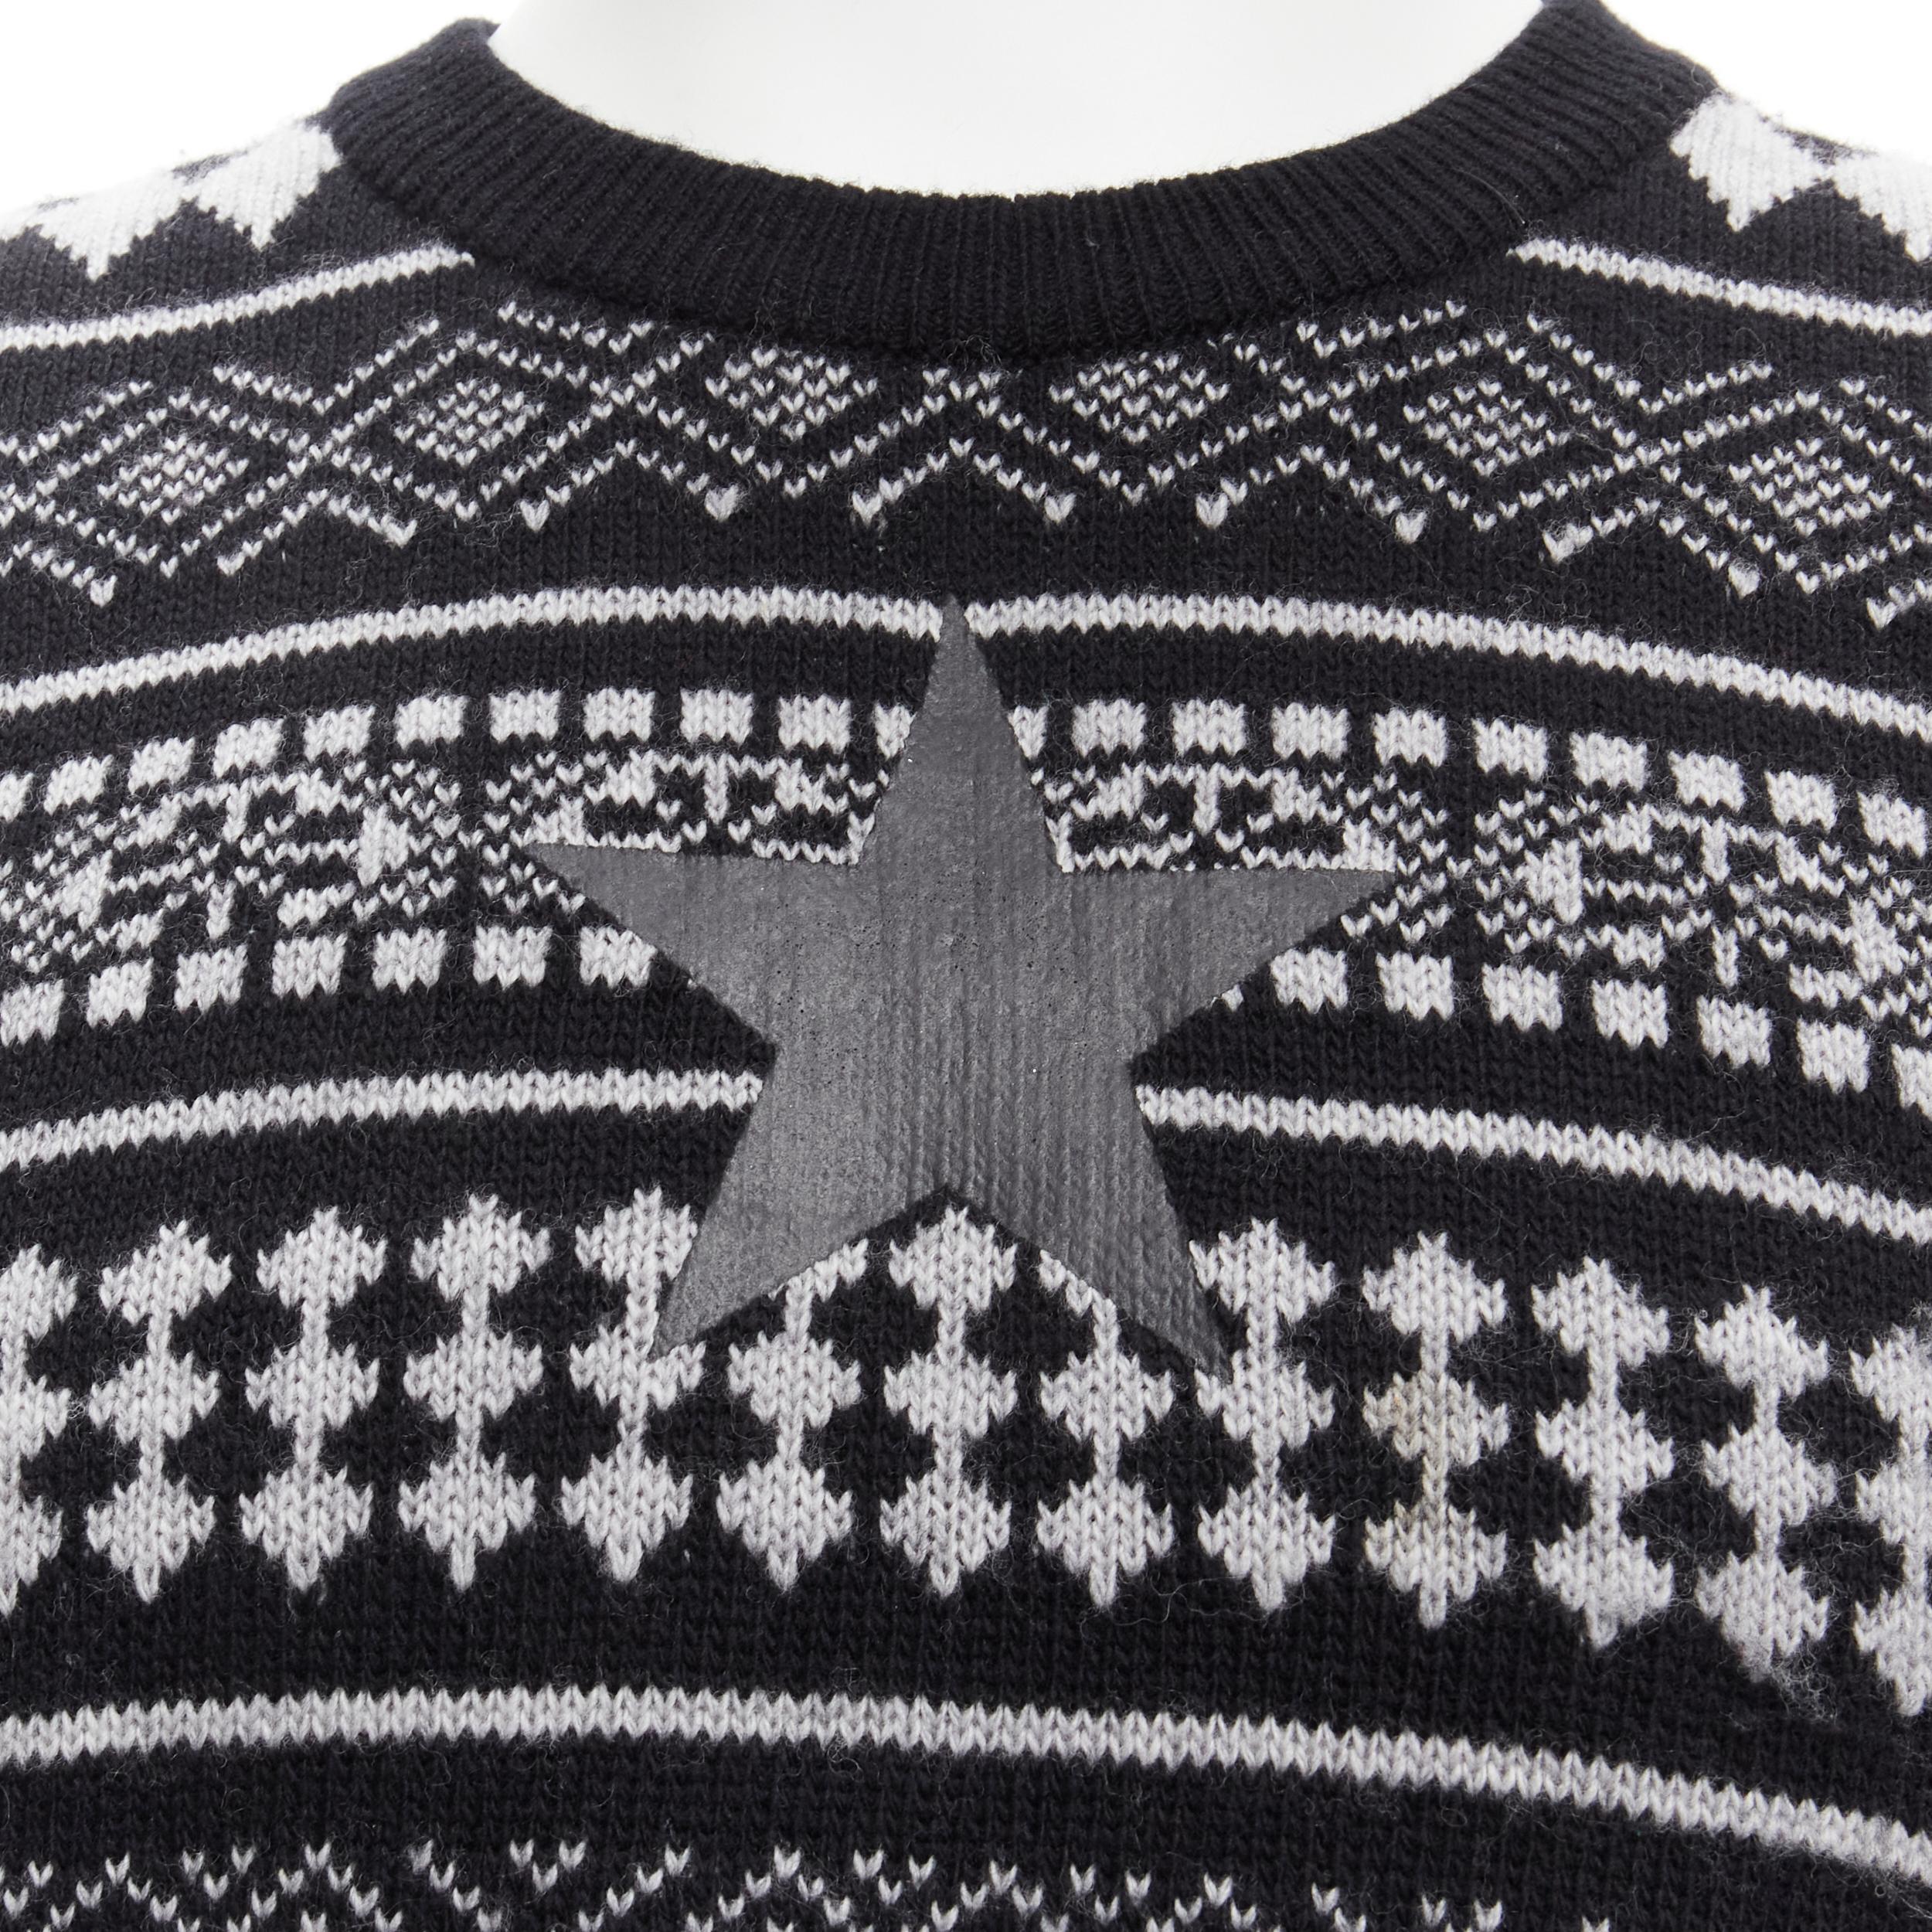 GIVENCHY Riccardo Tisci textured star stripes intarsia pullover sweater M
Reference: YNWG/A00099
Brand: Givenchy
Designer: Riccardo Tisci
Material: Wool
Color: Black, Grey
Pattern: Striped
Closure: Pullover
Extra Details: Side slits and slight high